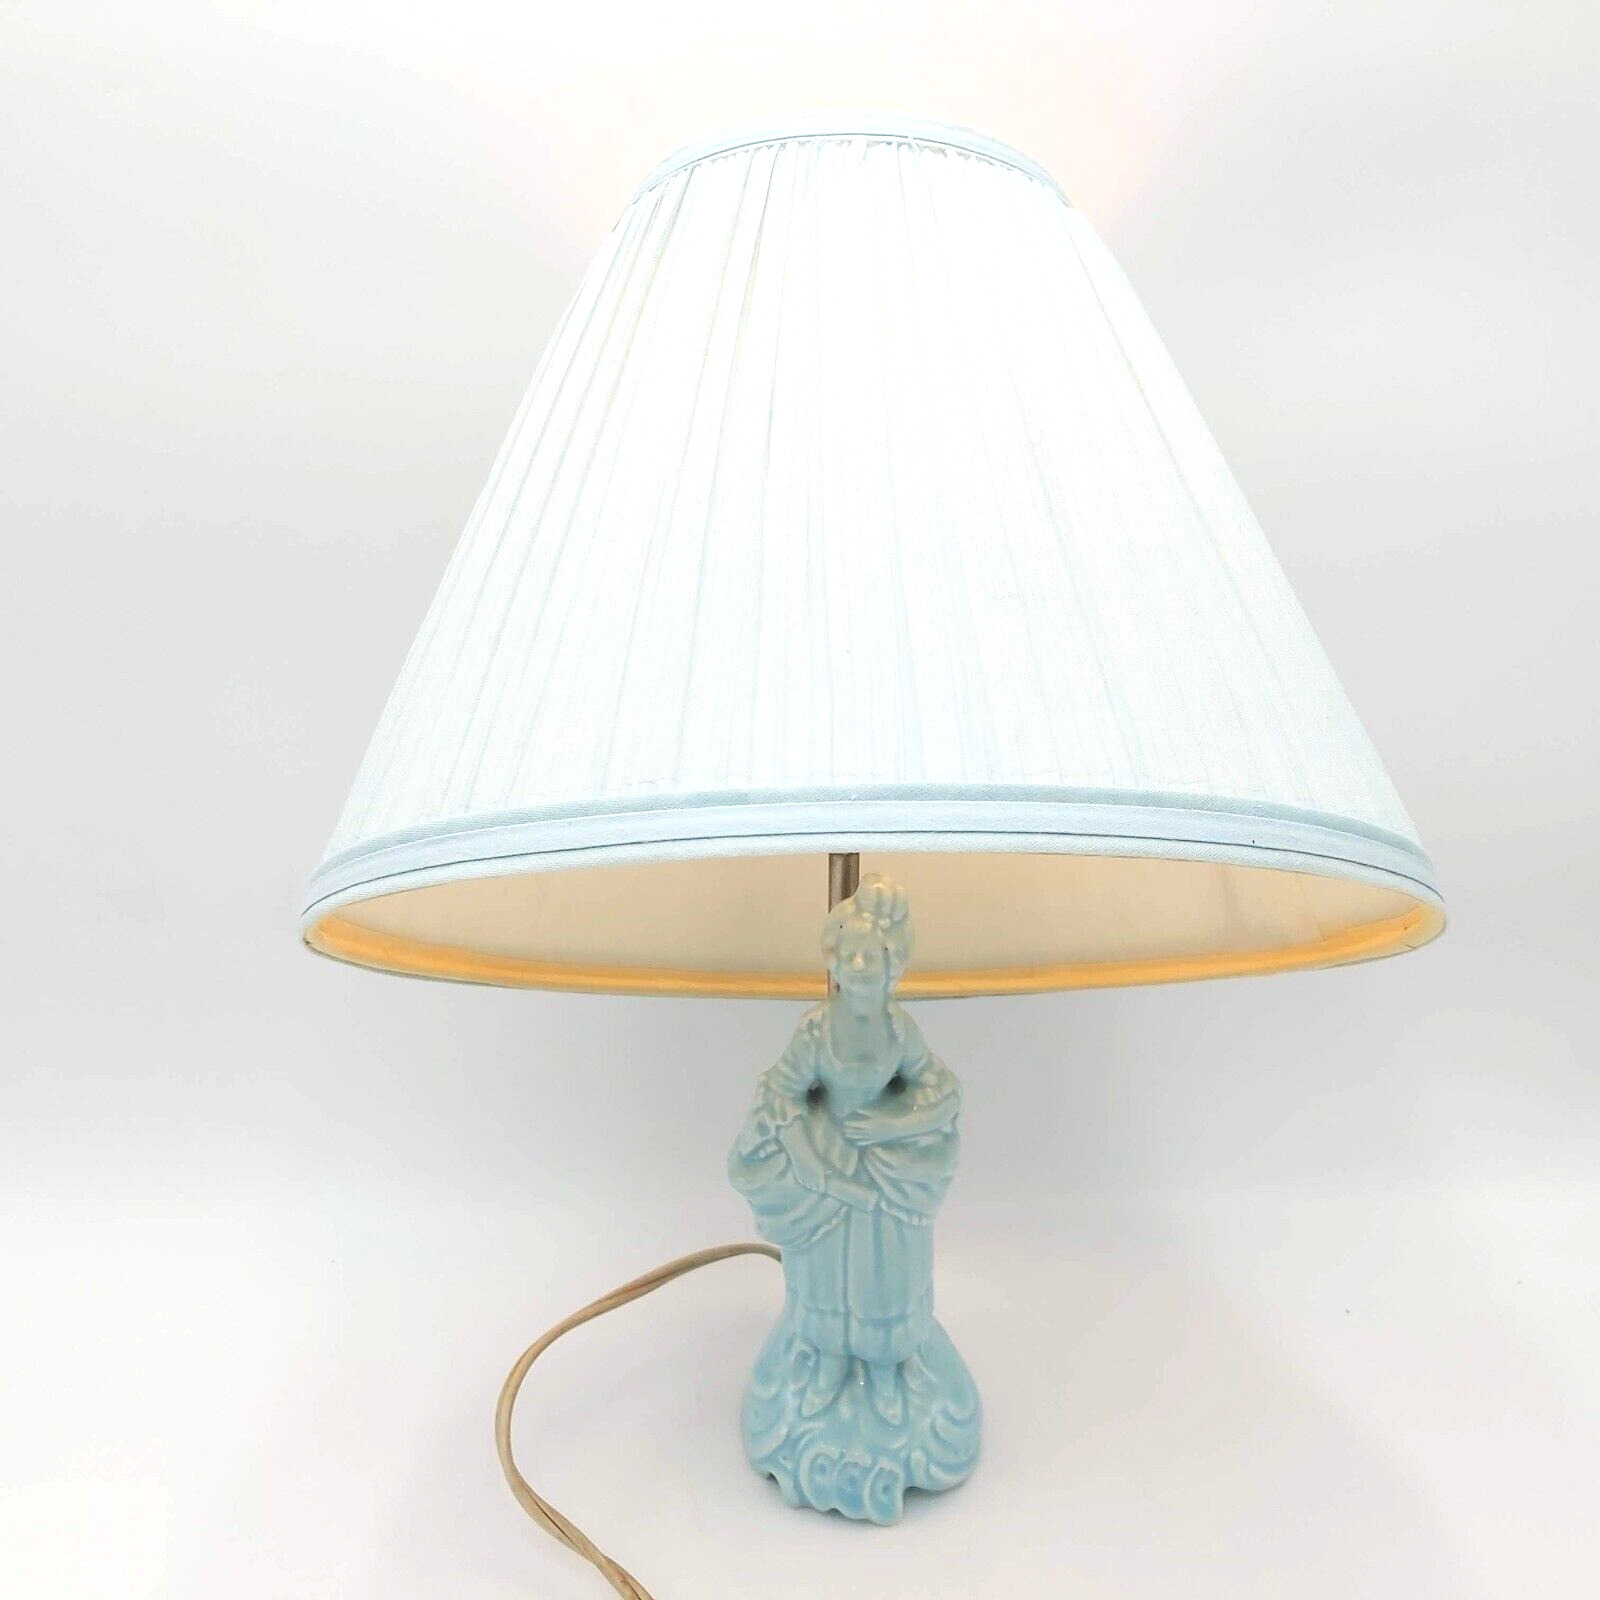 Bridgerton Lady Dressed in 1770s French Courtly Fashion - Ceramic Lamp Turquoise